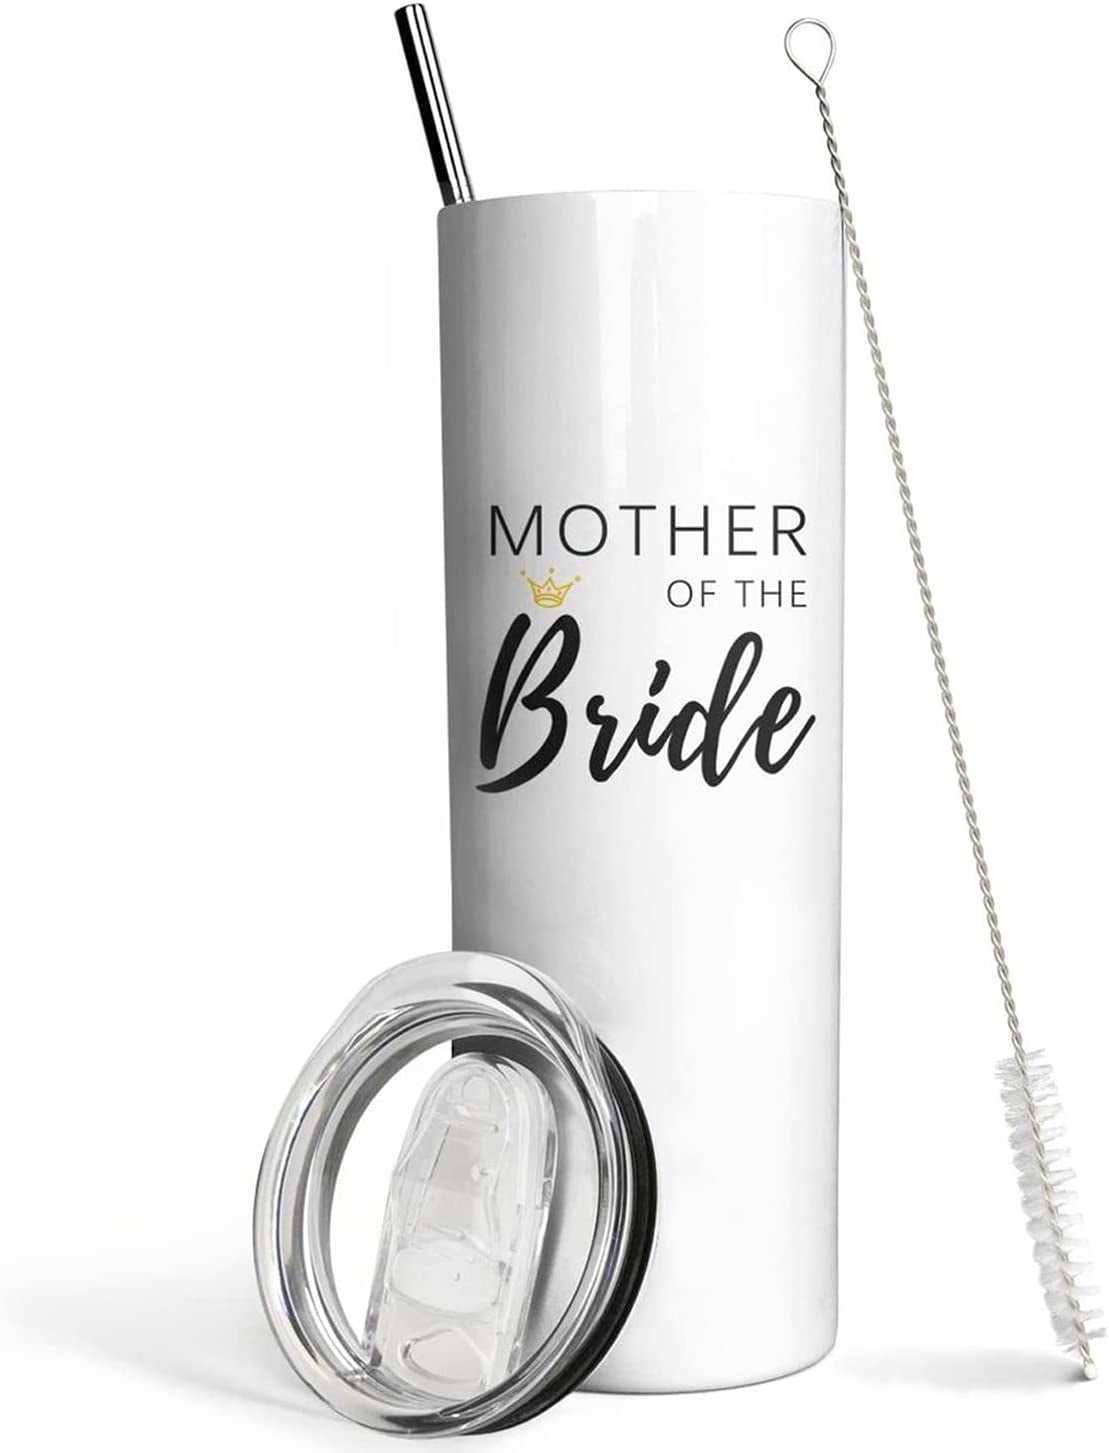  Mother of The Bride Gifts,Mother of the Groom Mother of the  Bride Tumblers, Wedding Gift for Engagement, Mother for Wedding Engagement  Favor Gifts - Wine Bottle Protector Bag Tumbler Combination Set